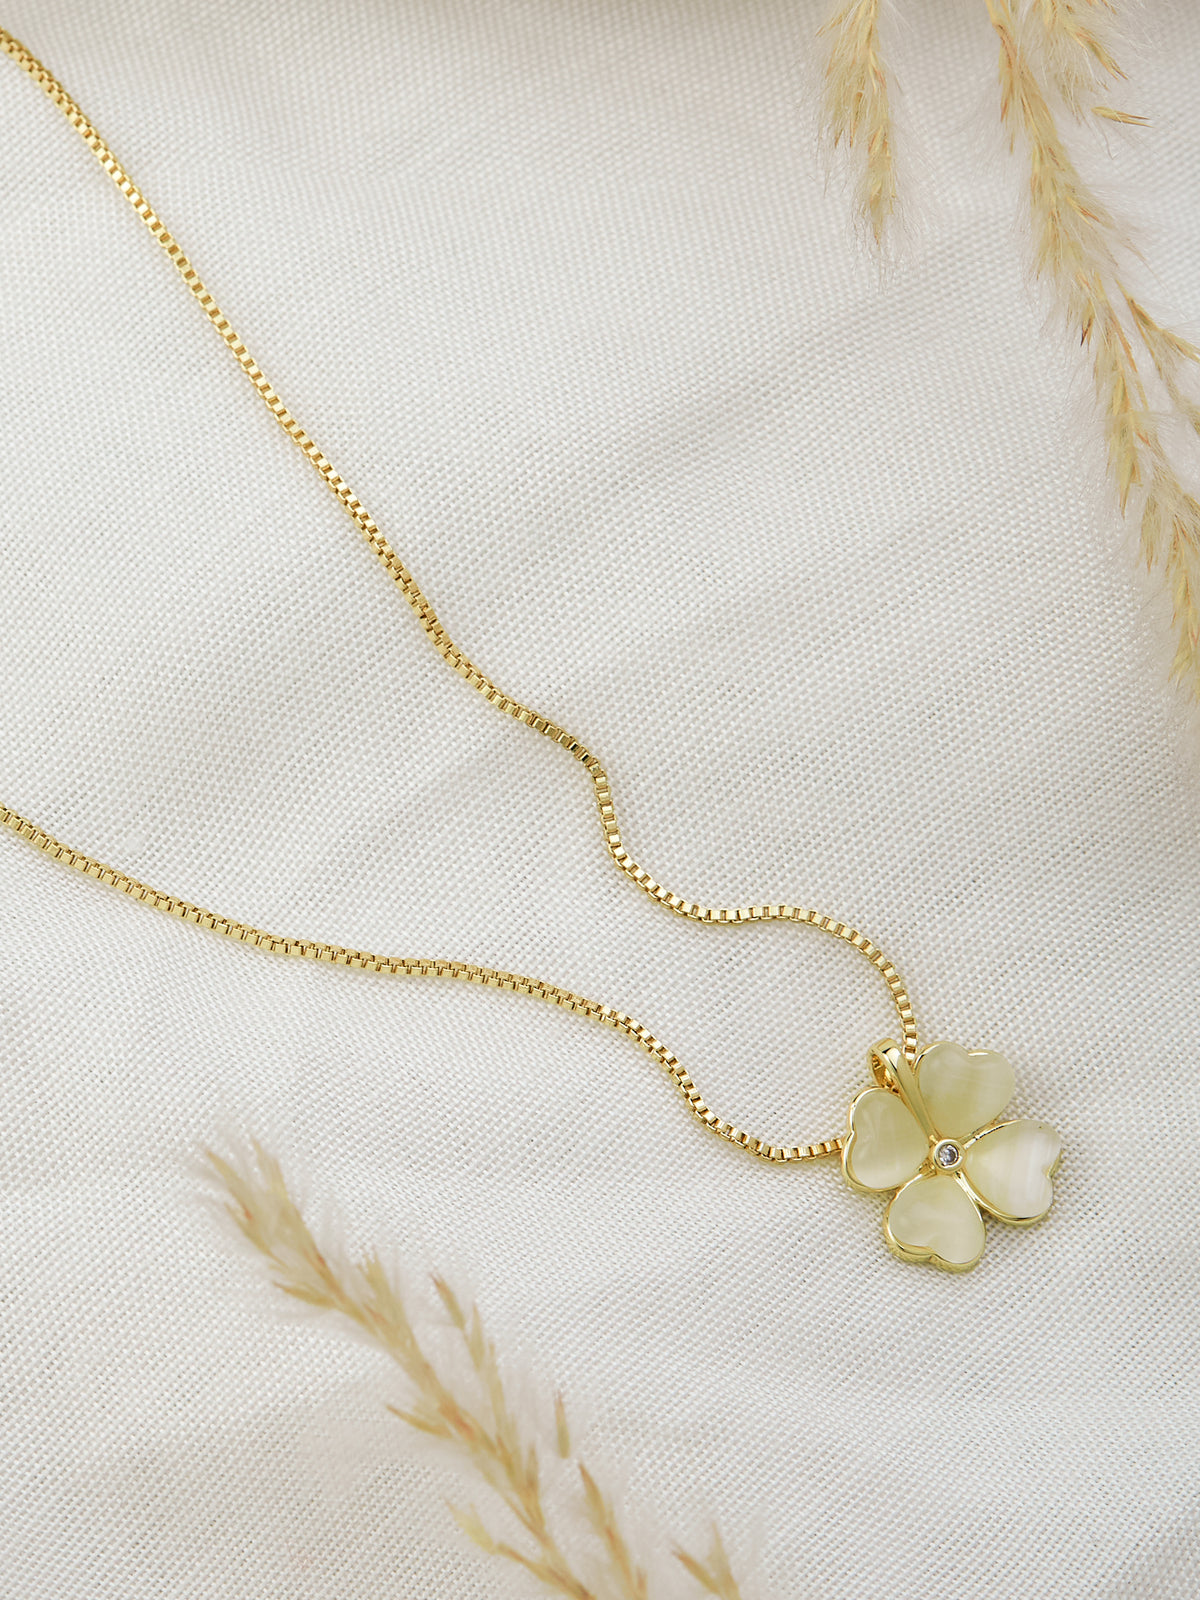 Gold Plated Chain with Flower Pendant for women & girls